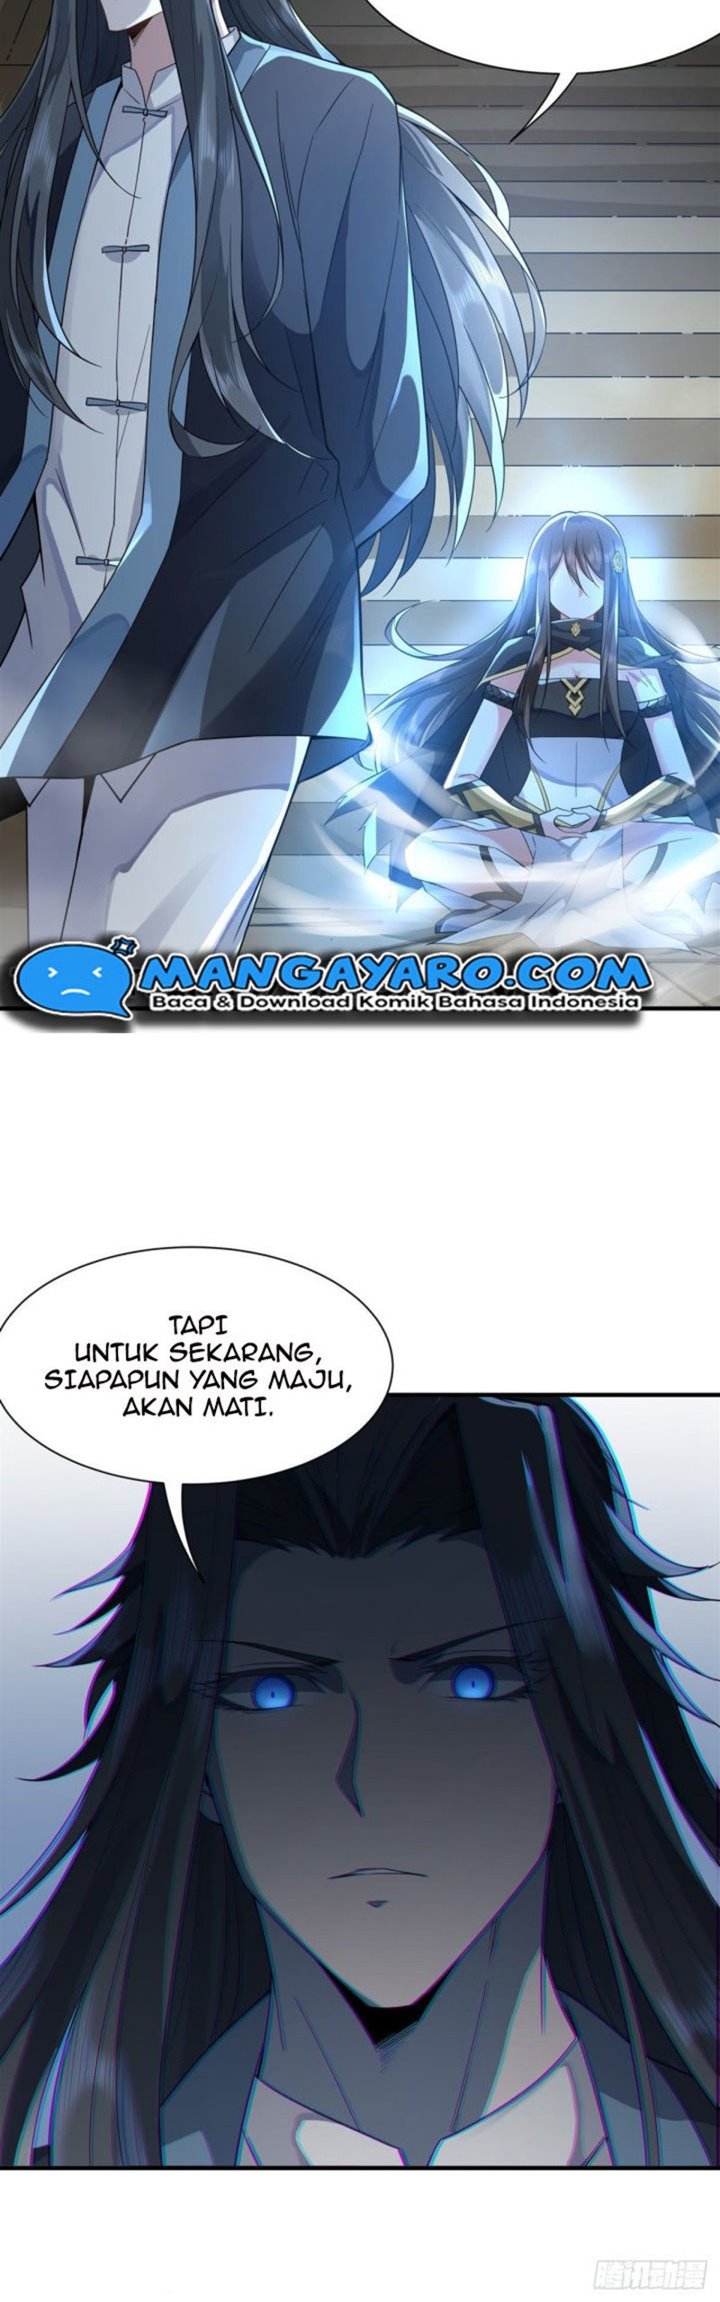 Dilarang COPAS - situs resmi www.mangacanblog.com - Komik my female apprentices are all big shots from the future 015 - chapter 15 16 Indonesia my female apprentices are all big shots from the future 015 - chapter 15 Terbaru 12|Baca Manga Komik Indonesia|Mangacan